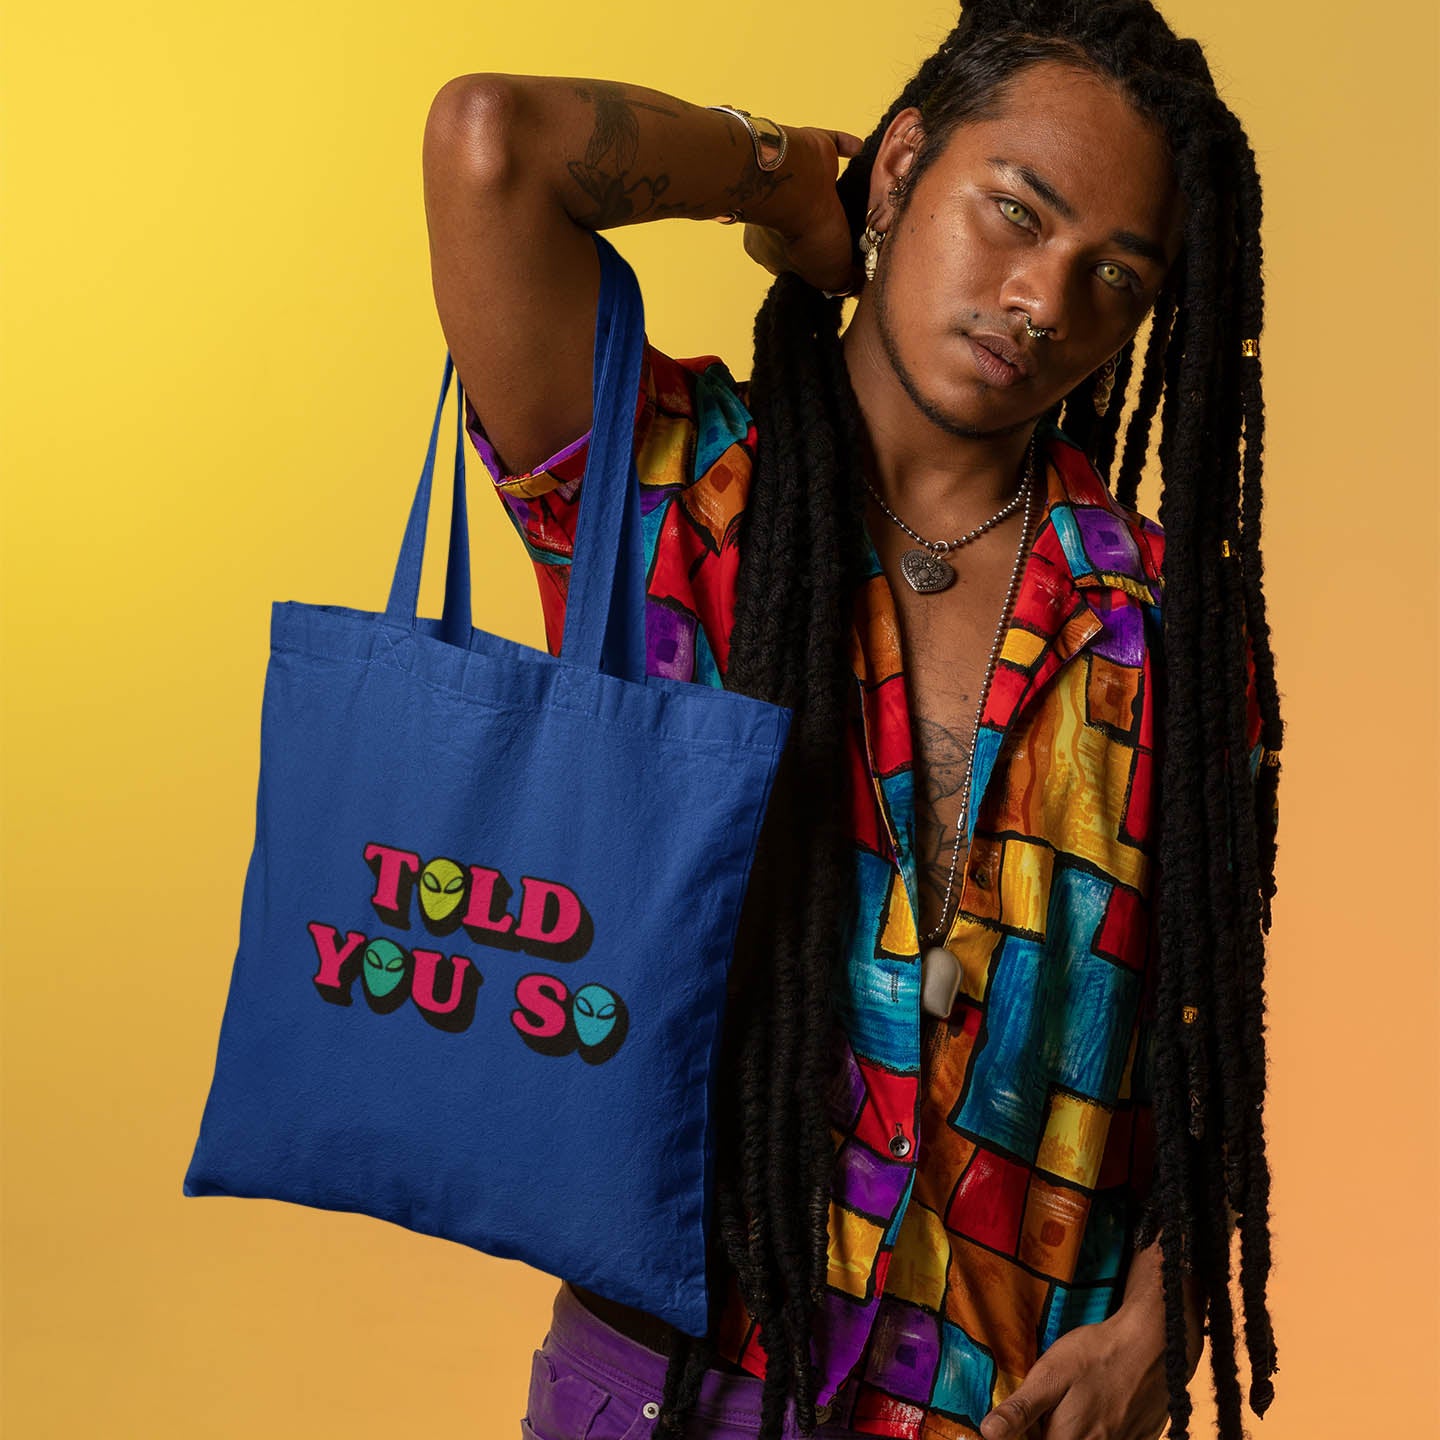 #WEIRDO | TOLD YOU SO tote bag for you weird people who believe in Aliens!